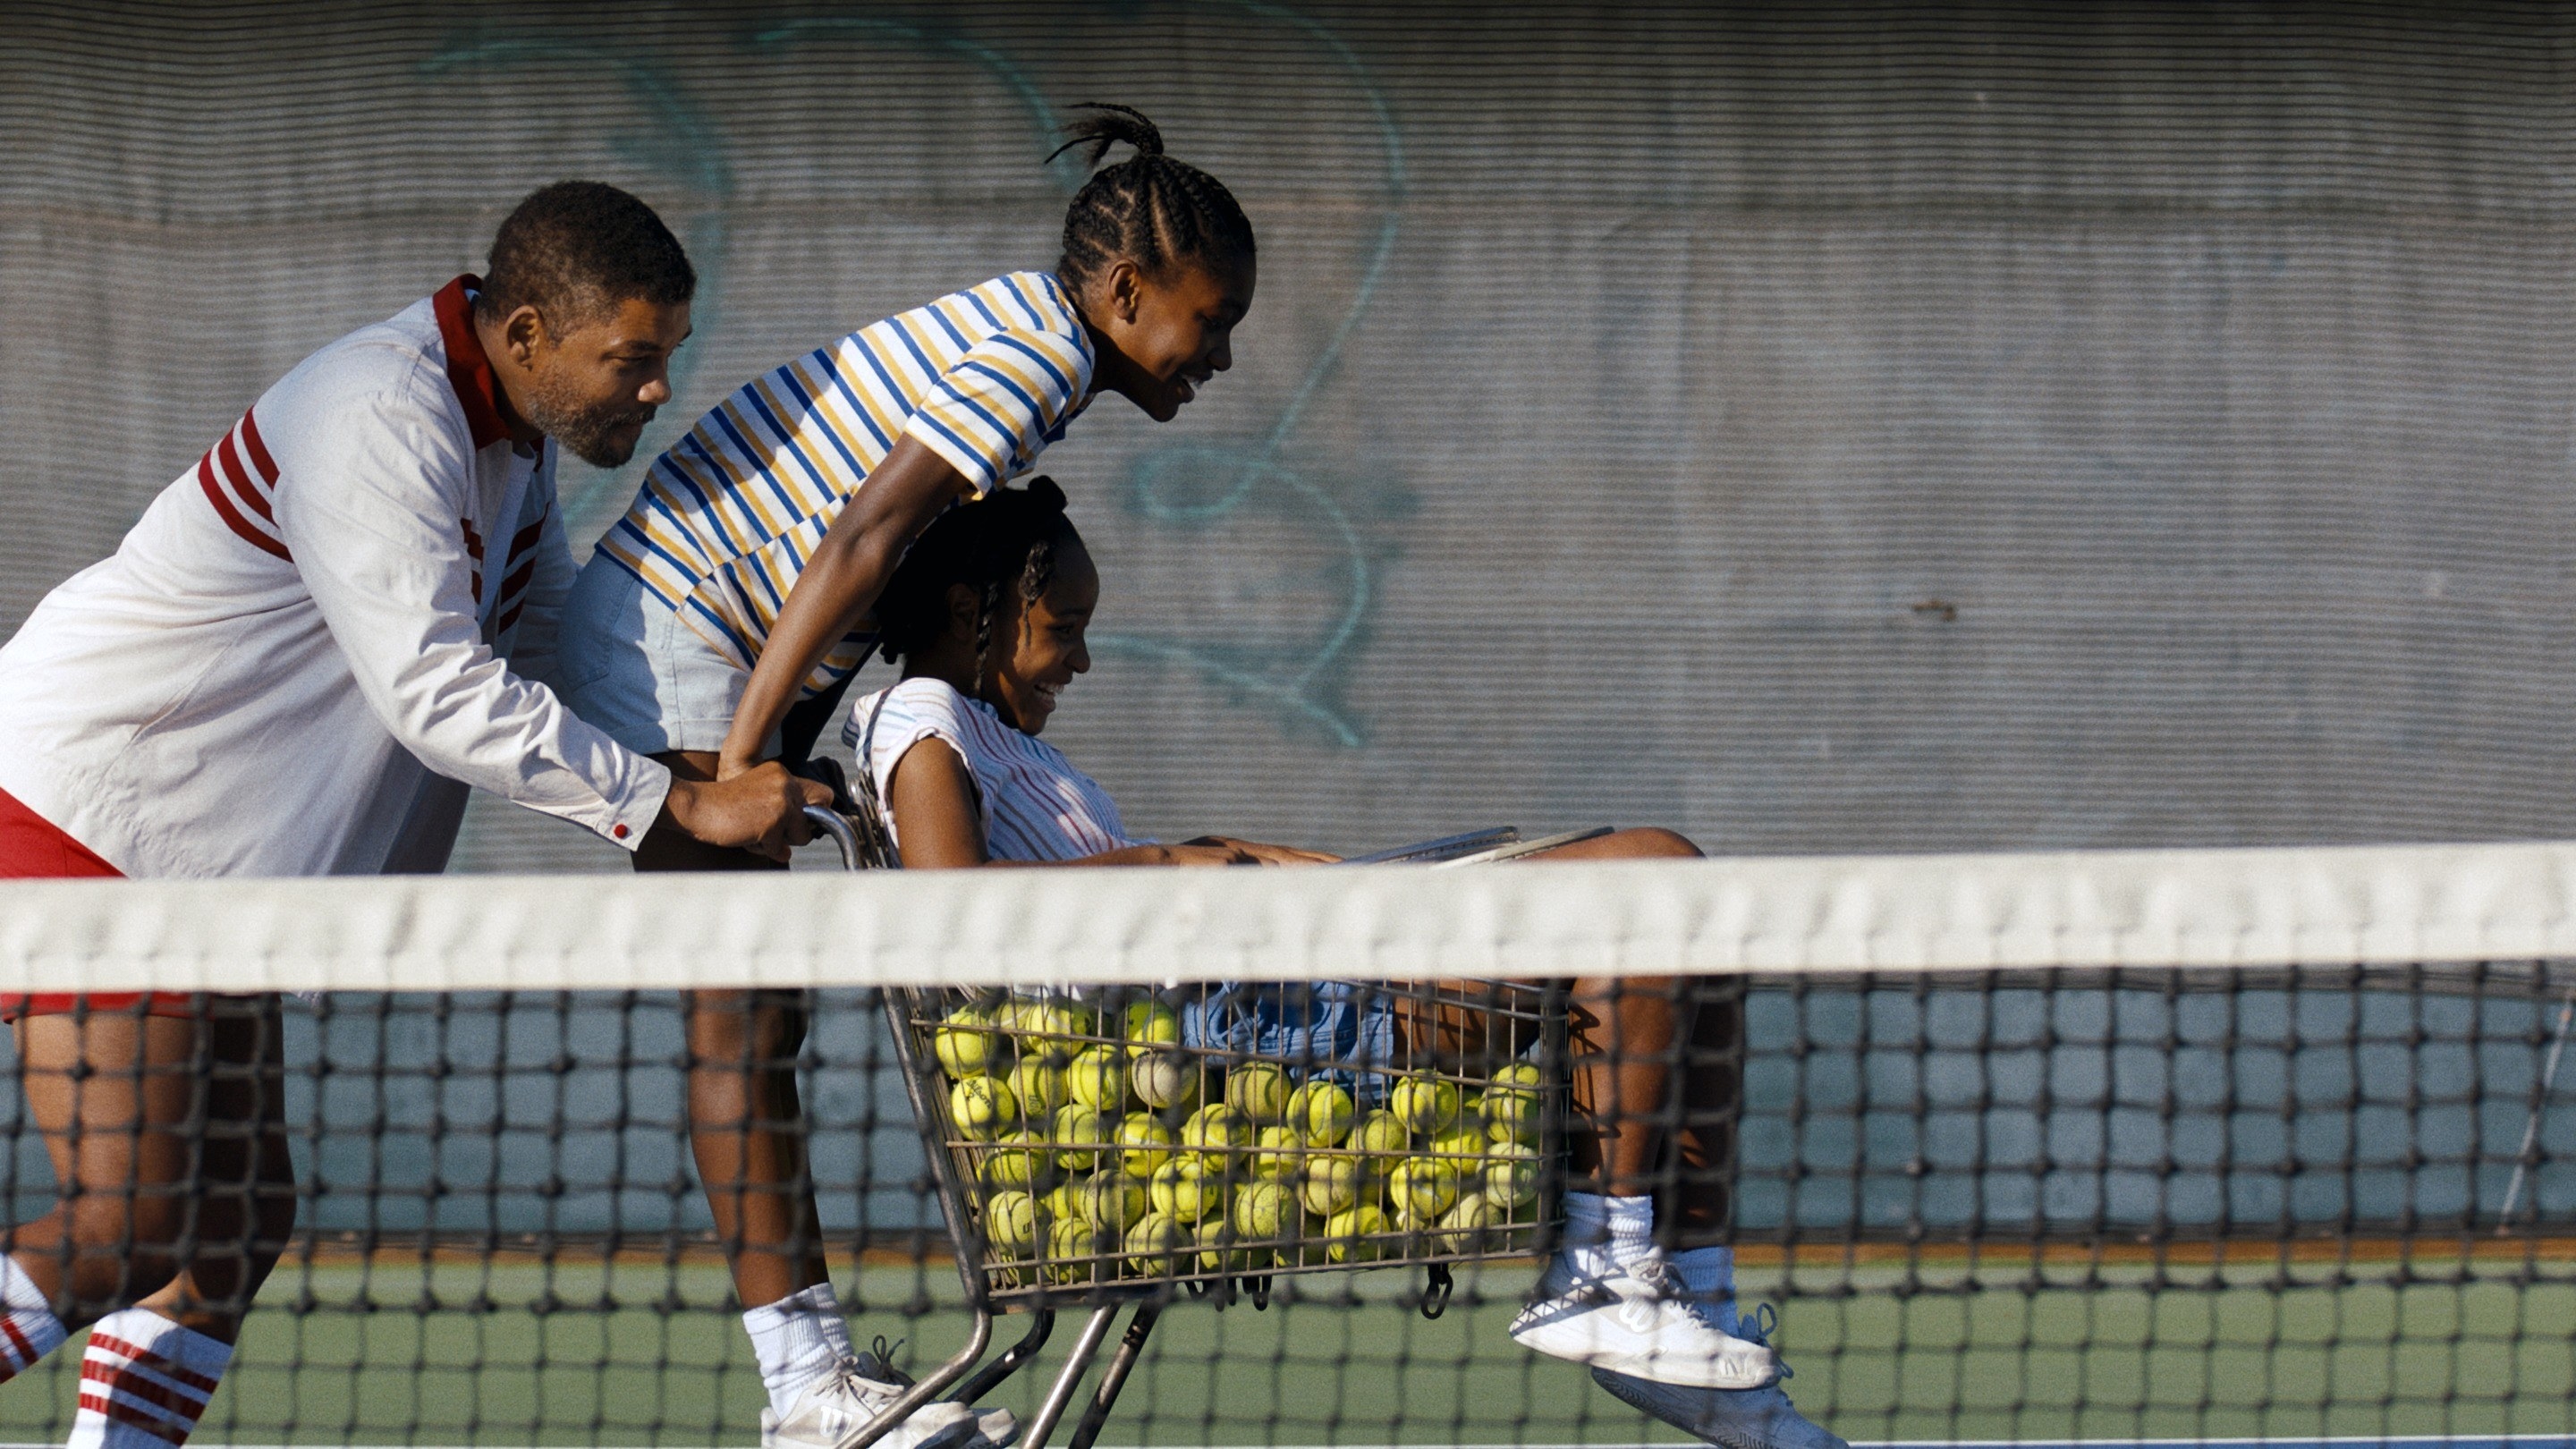 Richard pushing Venus and Serena across a tennis court as they ride on a shopping cart filled with tennis balls